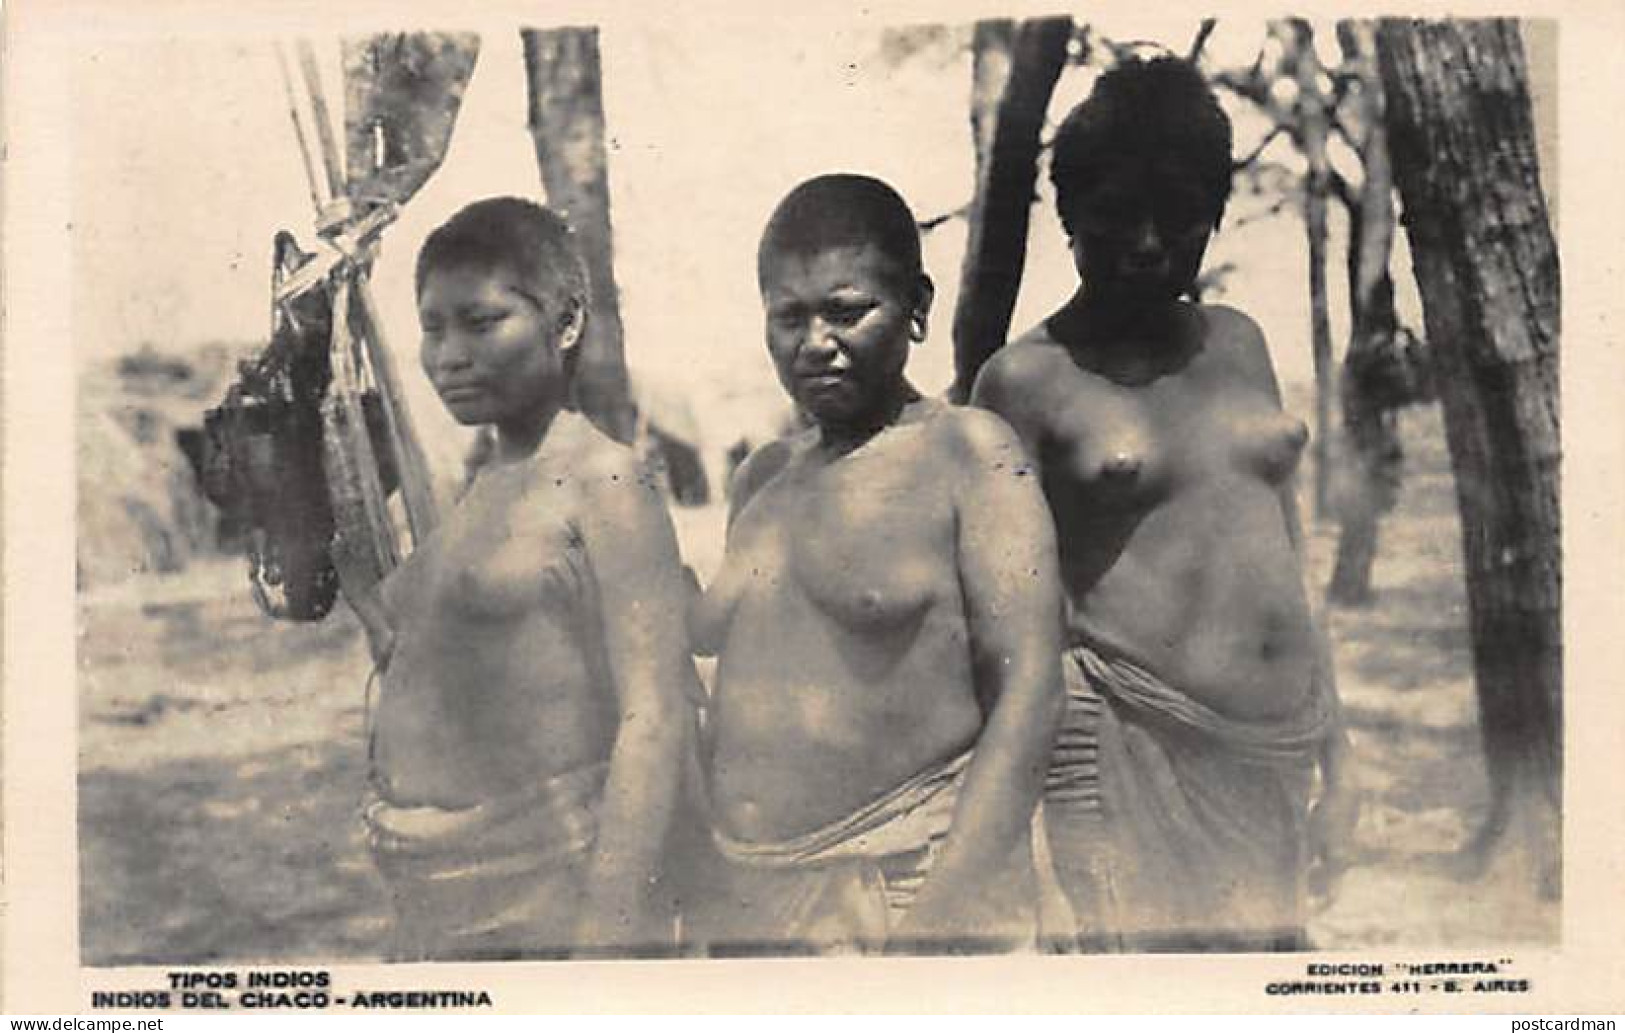 ARGENTINA - Chaco - Topless Nude Indian Women - REAL PHOTO Publ. Herrera. - Argentina